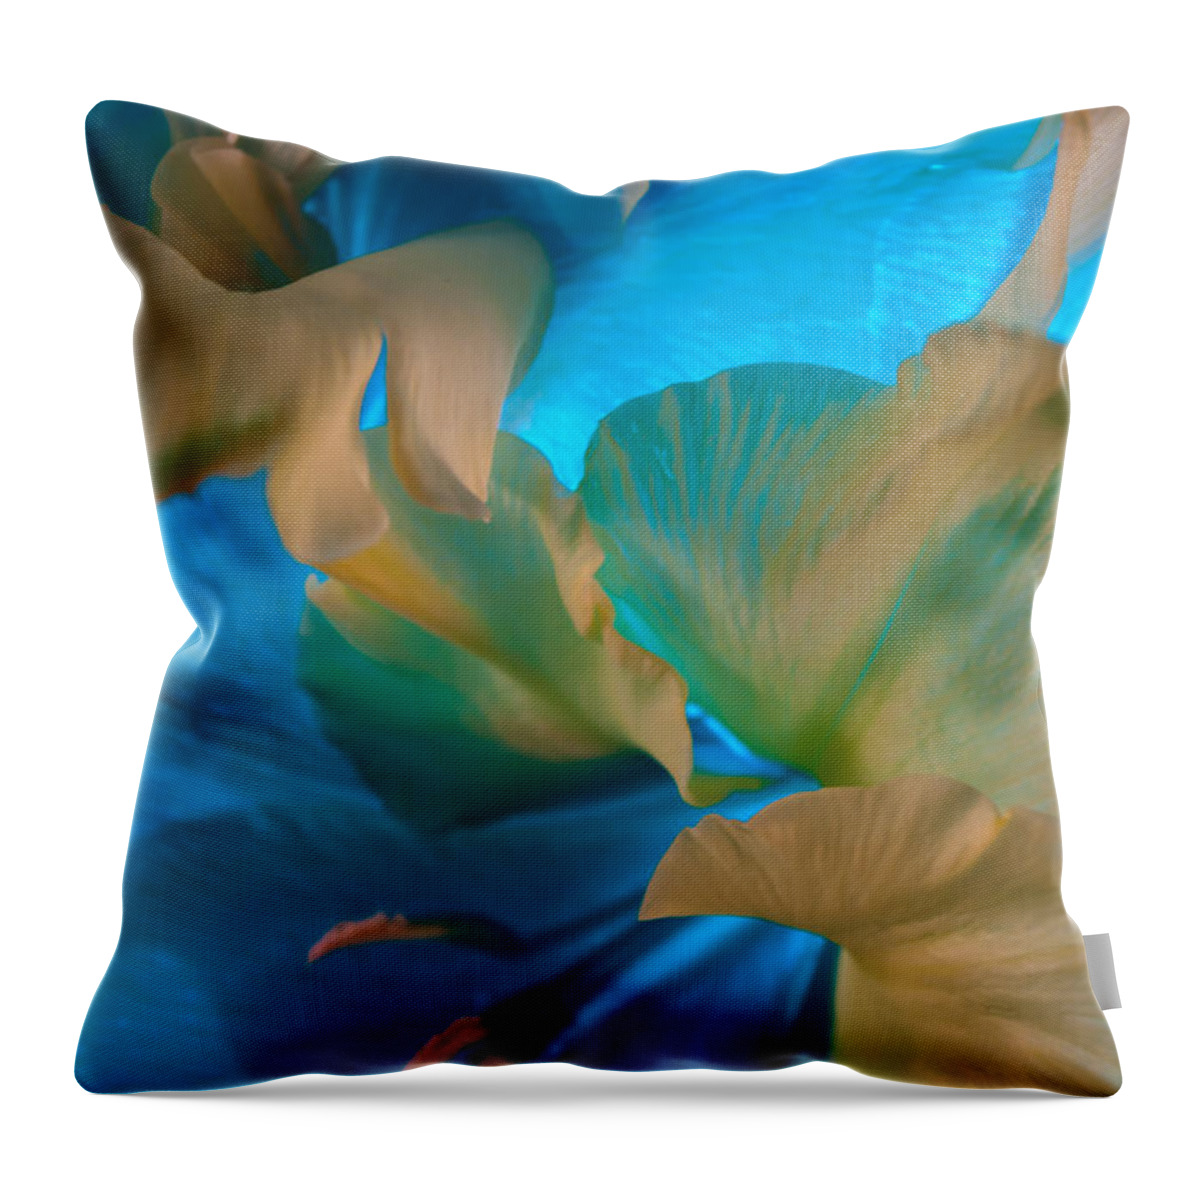 Blue Throw Pillow featuring the photograph Blue Danube by Bobby Villapando